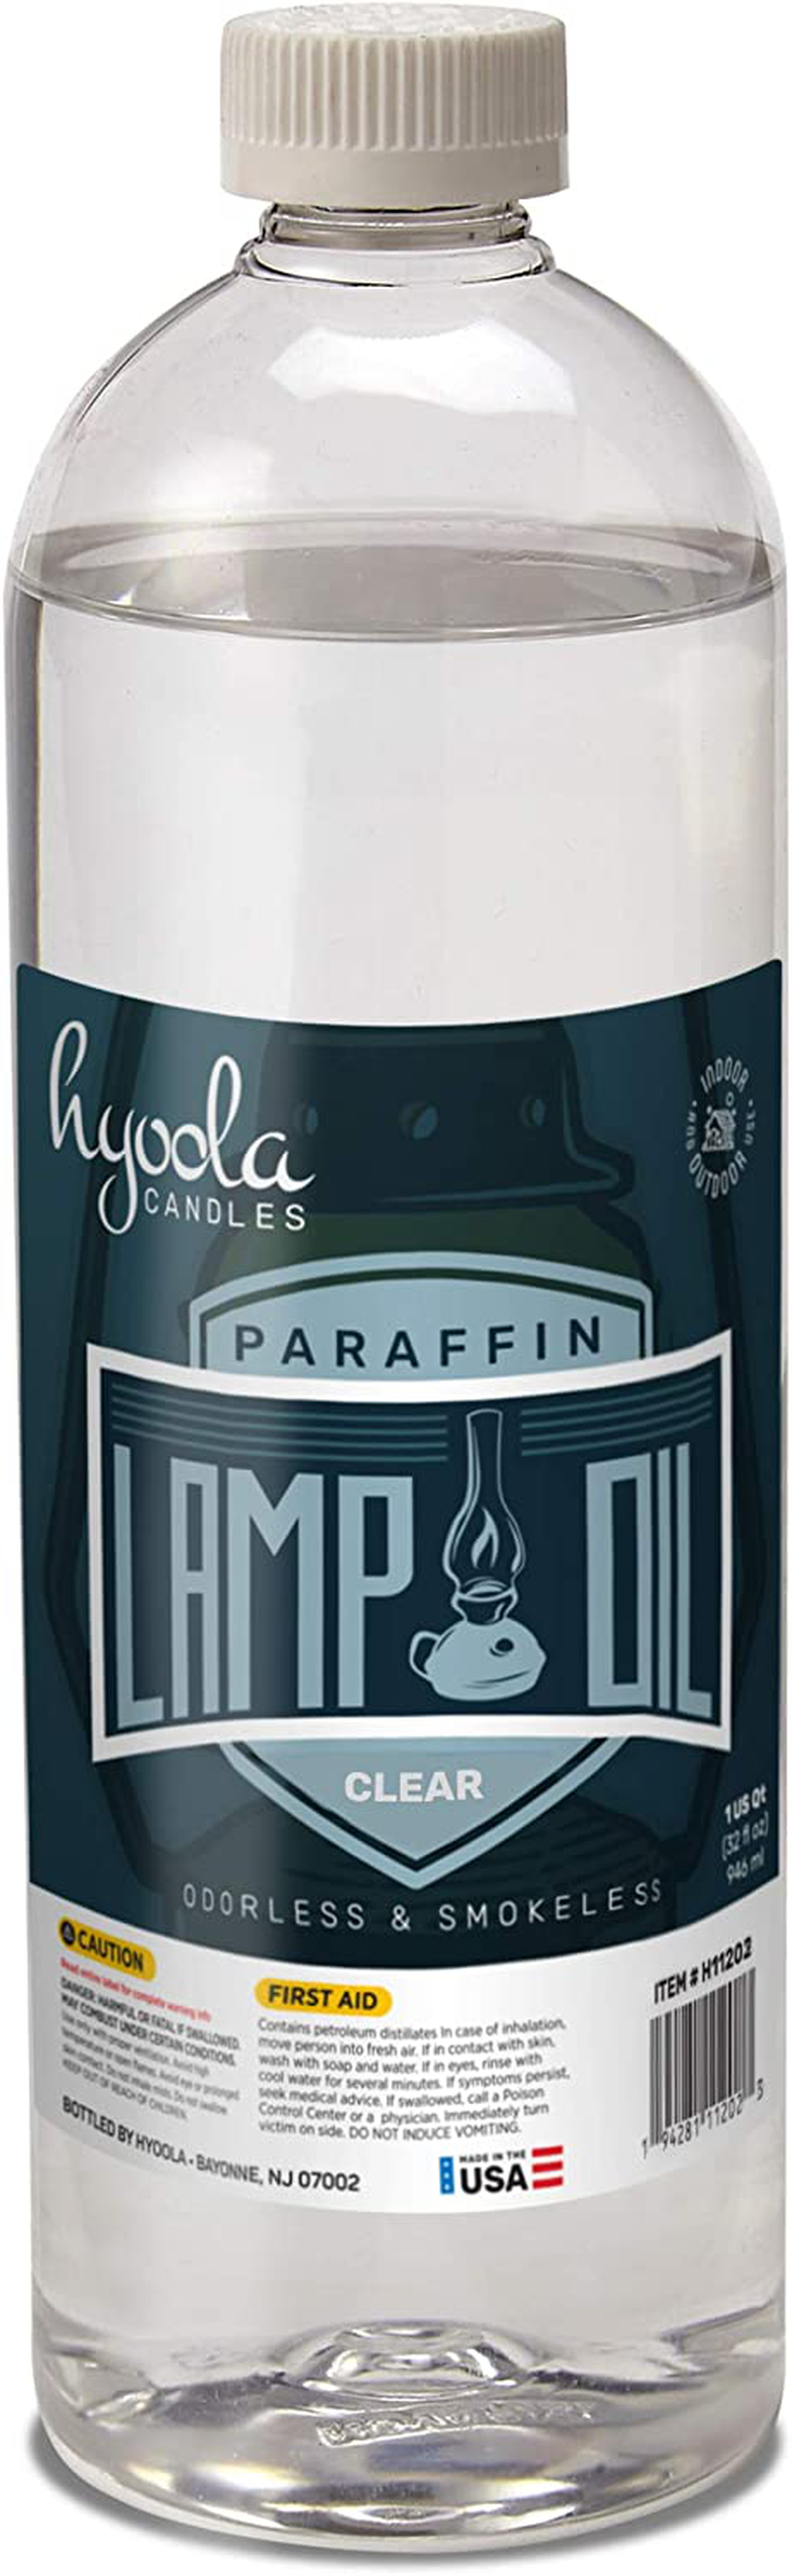 Hyoola Candles Liquid Paraffin Lamp Oil - Clear Smokeless, Odorless, Ultra Clean Burning Fuel for Indoor and Outdoor Use - Highest Purity Available - 32oz